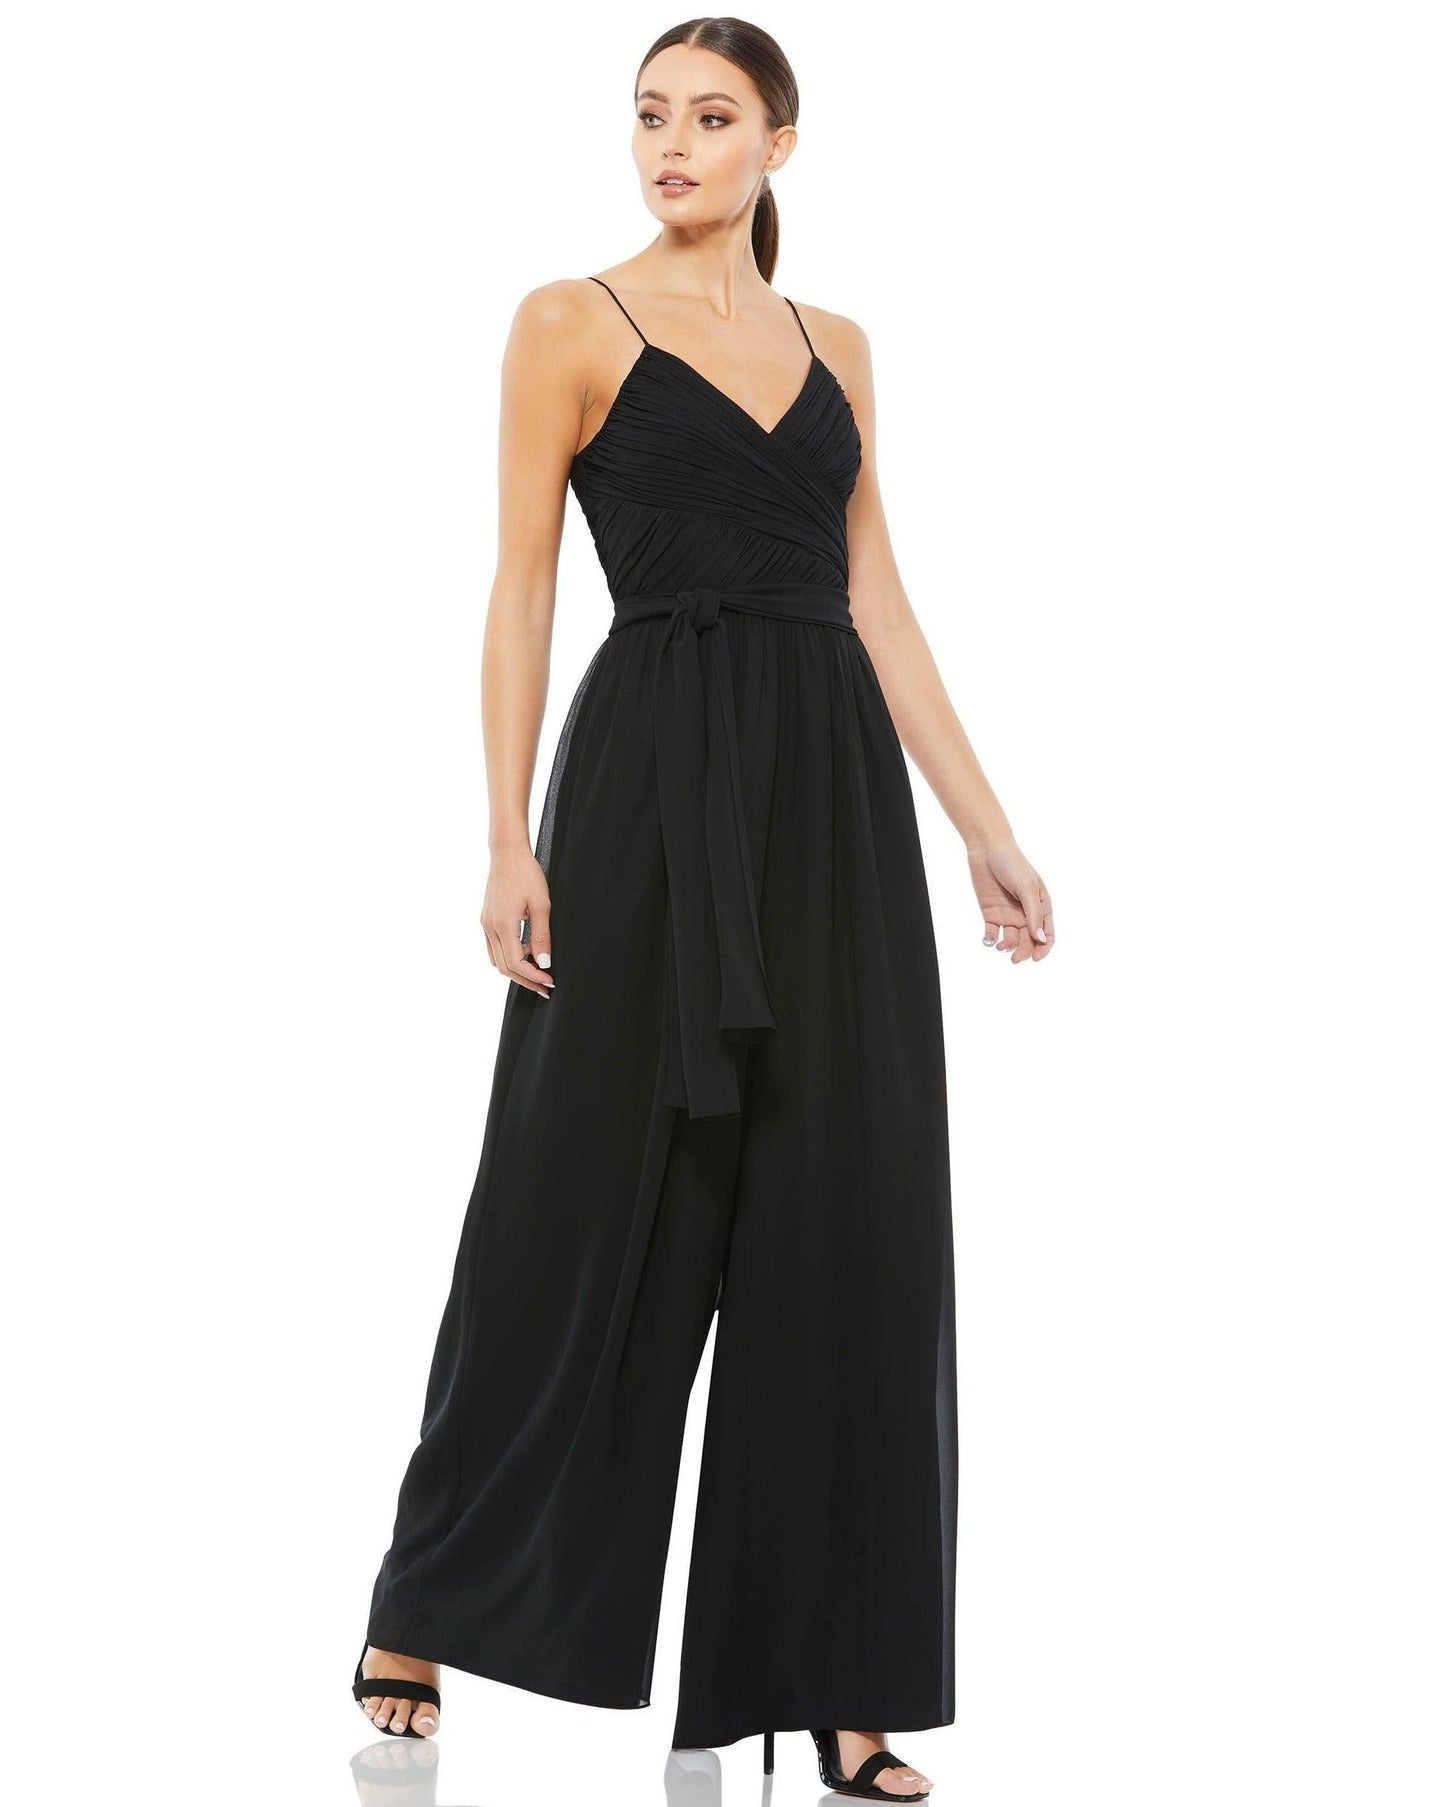 Mac Duggal Formal Spaghetti Strap Jumpsuit 2651 - The Dress Outlet